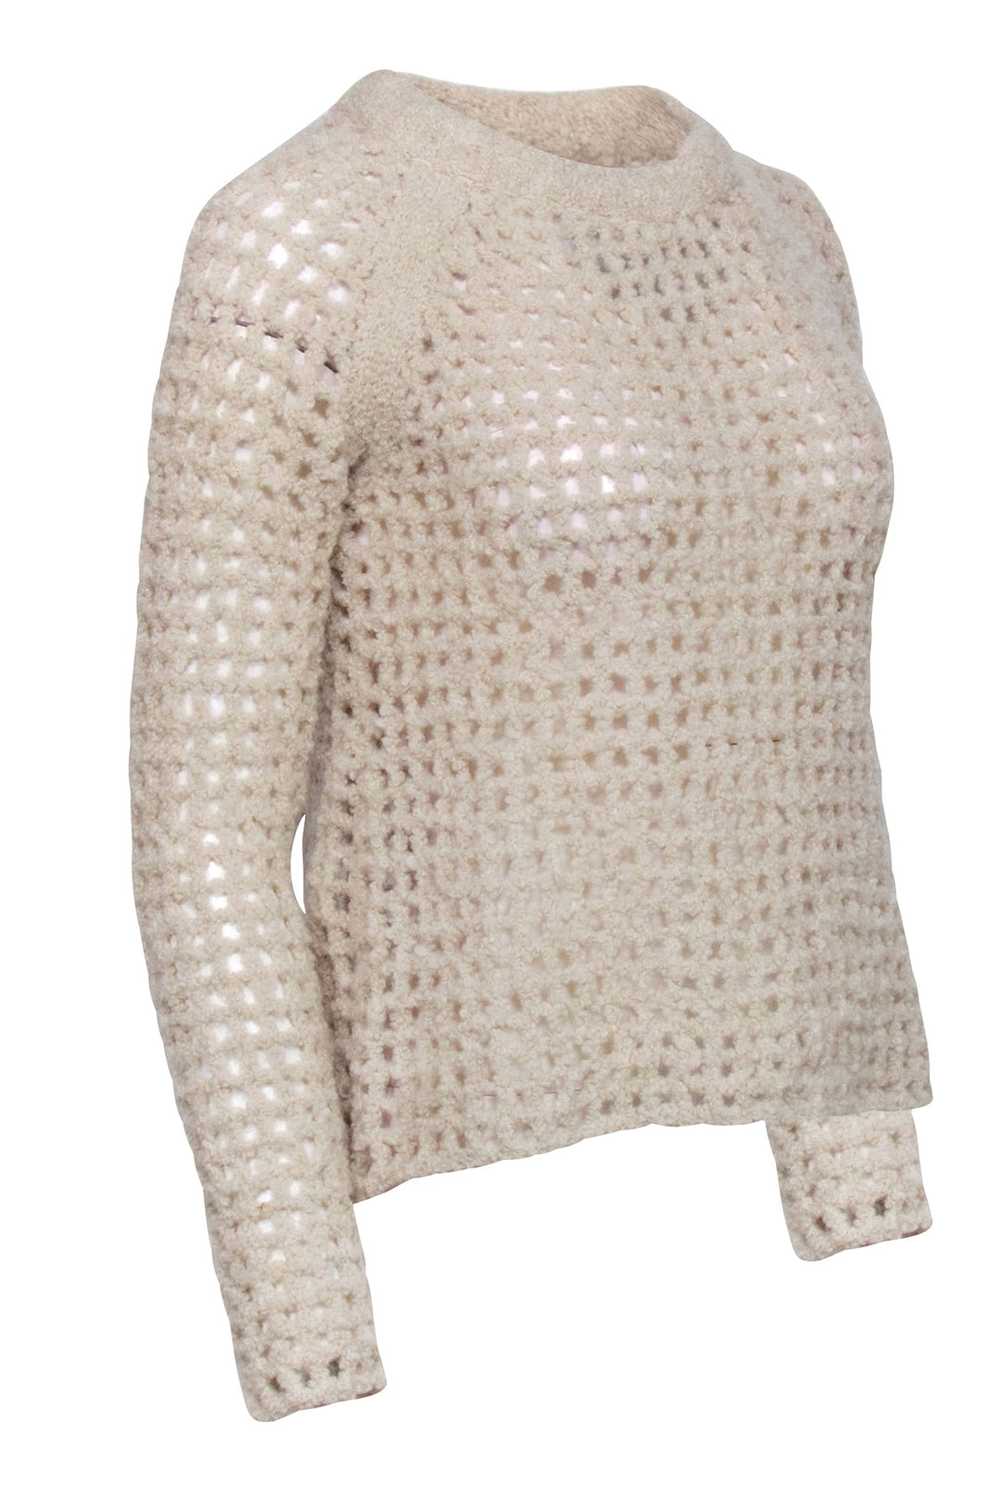 Zadig & Voltaire - Beige Chunky Knit Crewneck Swe… - image 2